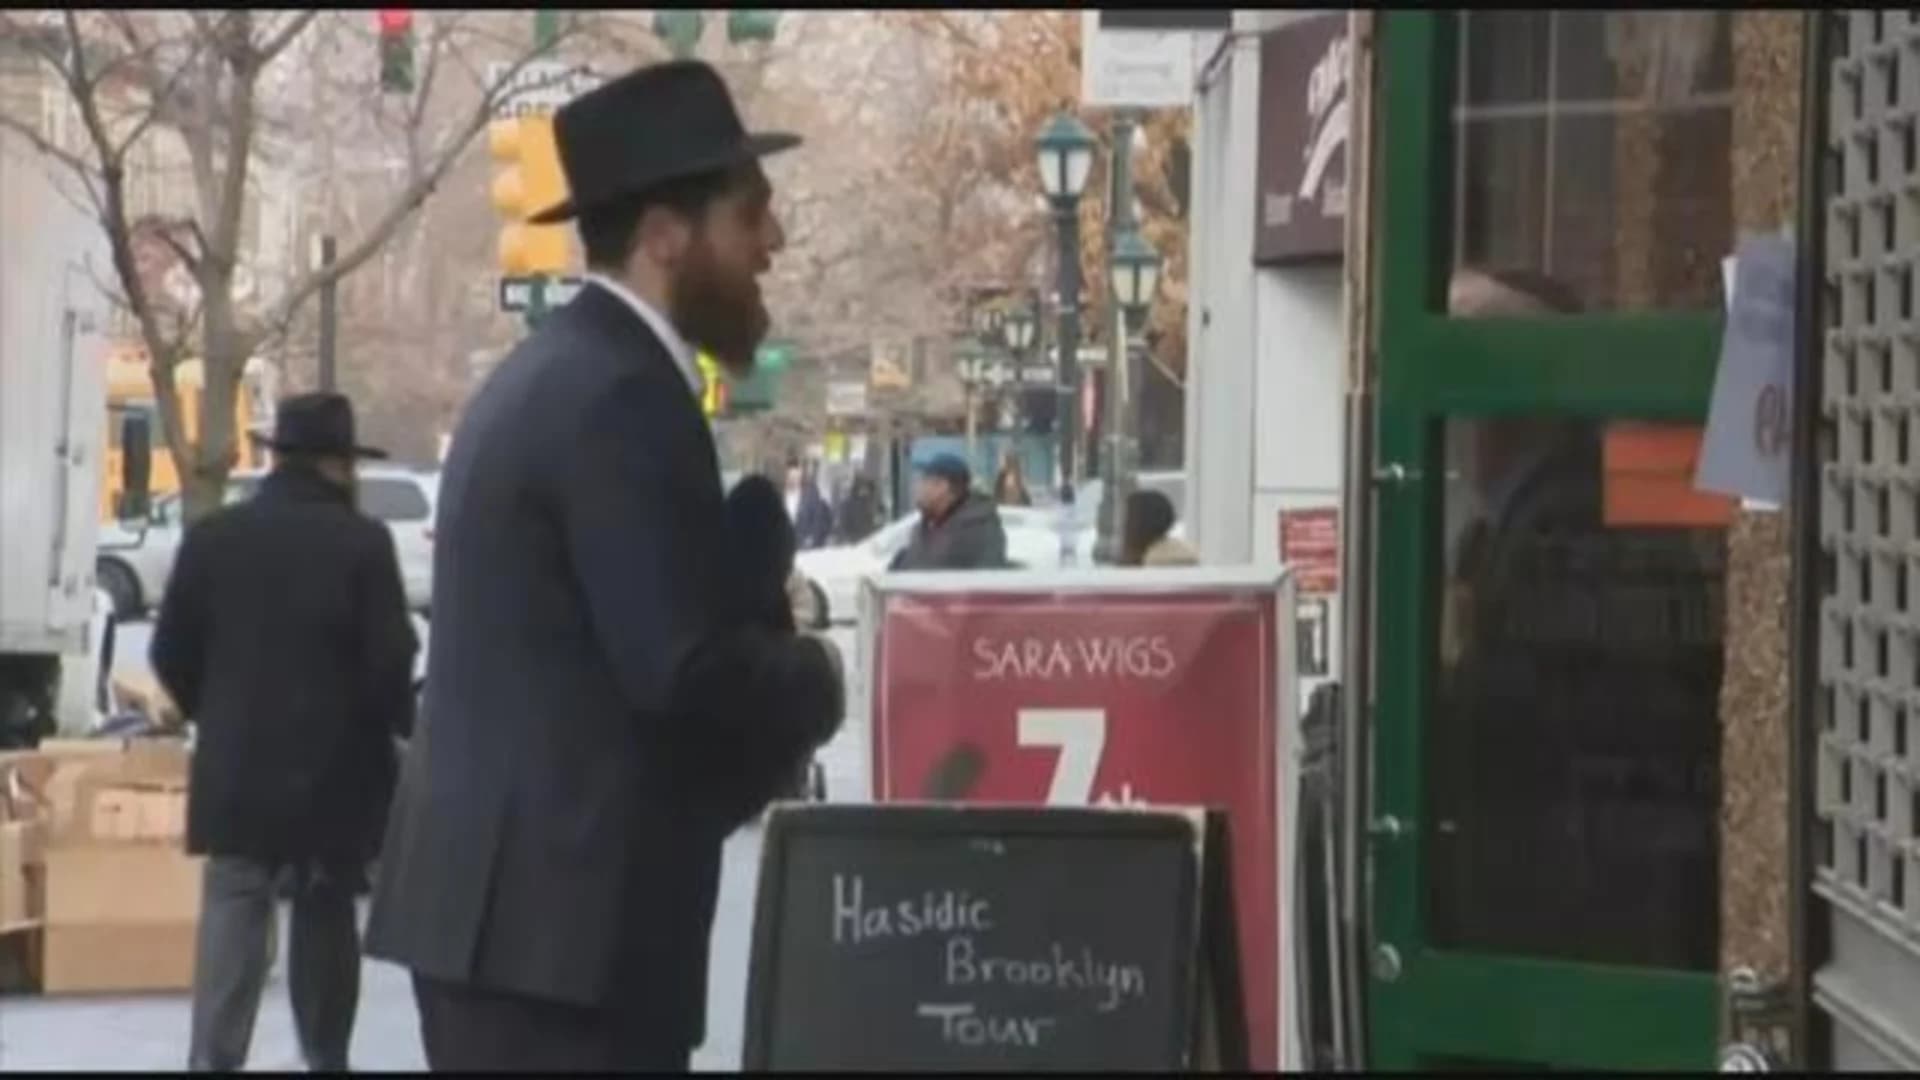 NYC ups policing in Jewish areas after spate of attacks